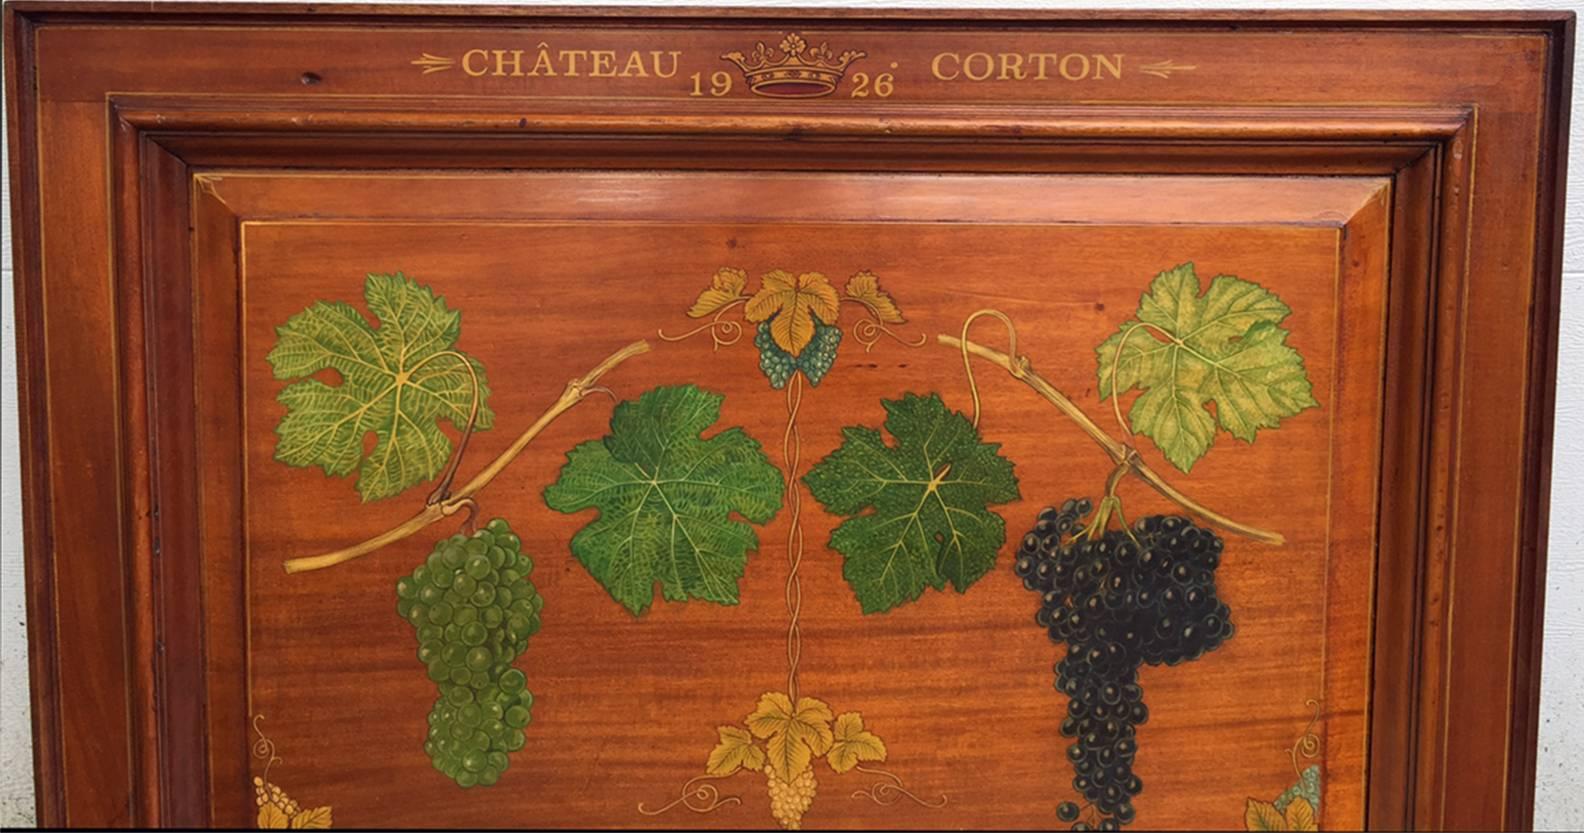 French Chateau Corton Mahogany Wine Cellar Hand-Painted Sign, circa 1926 For Sale